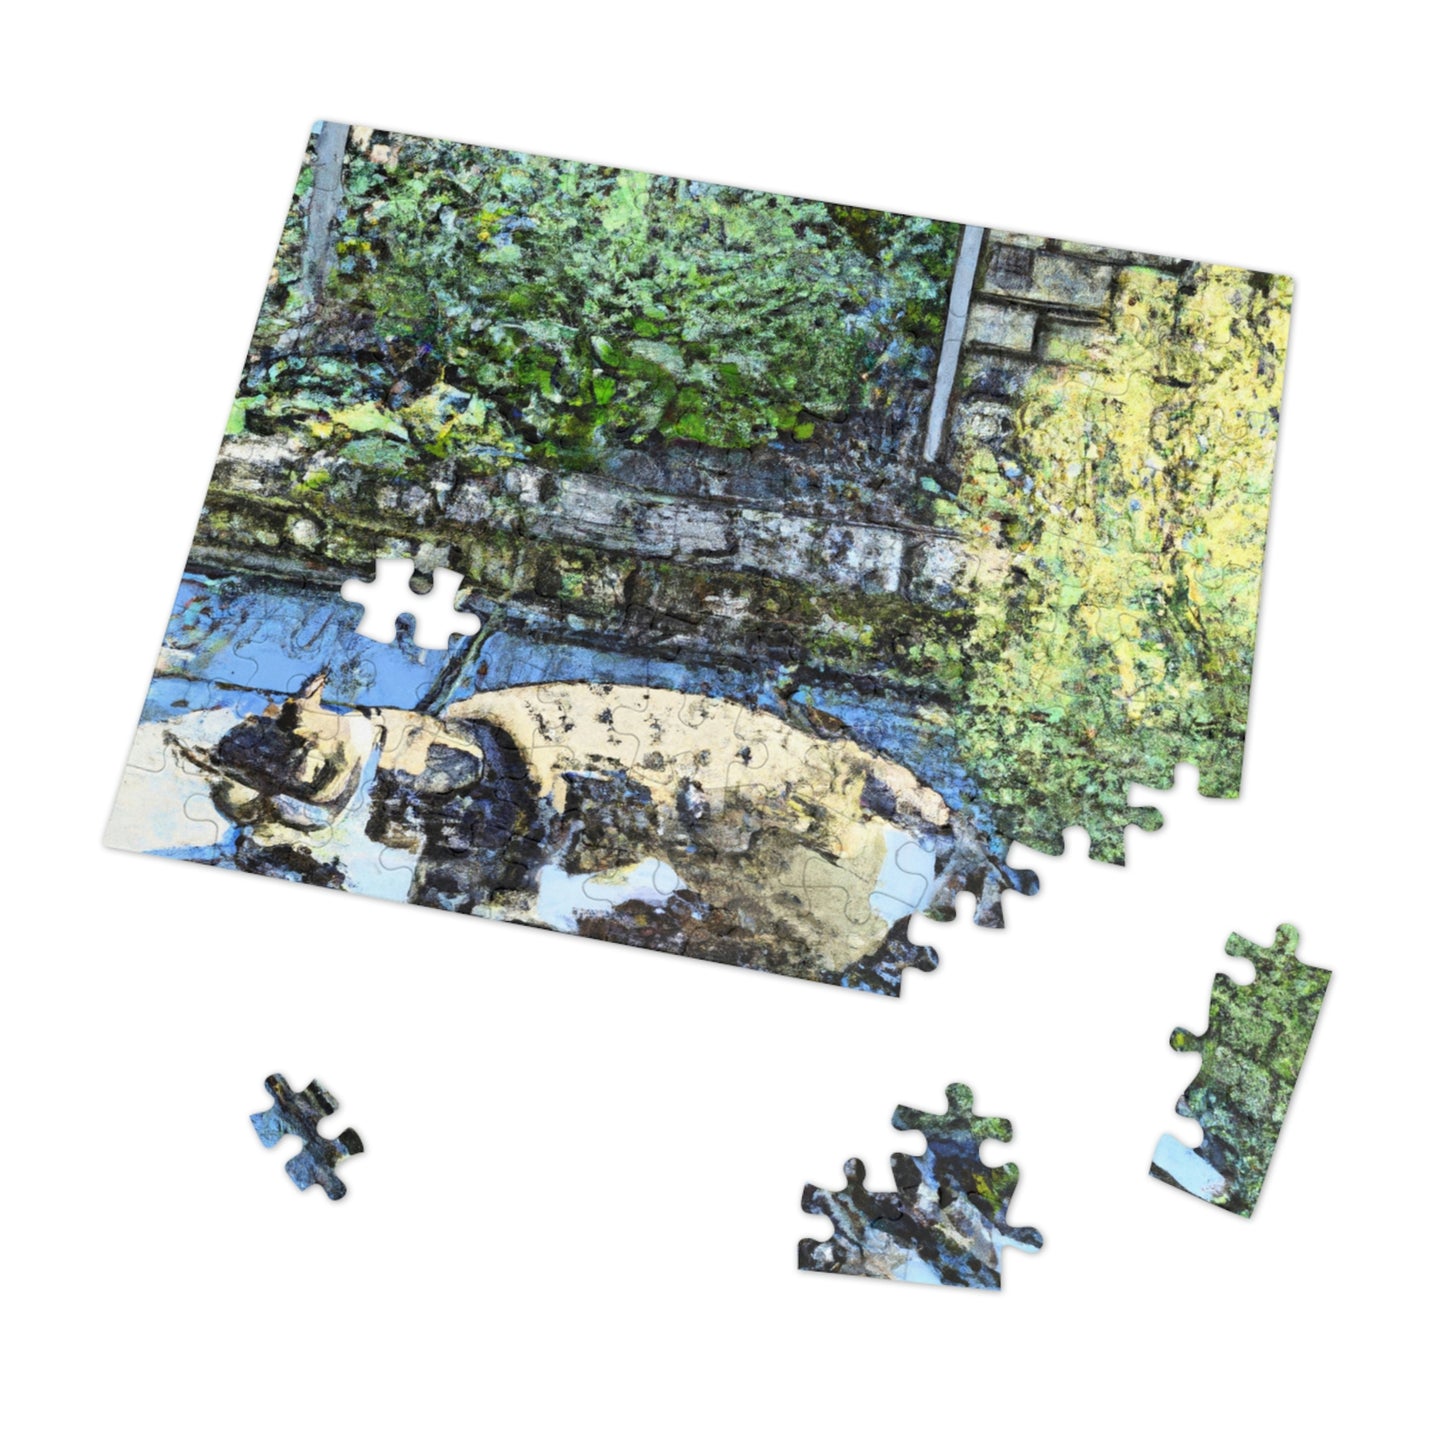 "A Cat's Life of Luxury" - The Alien Jigsaw Puzzle